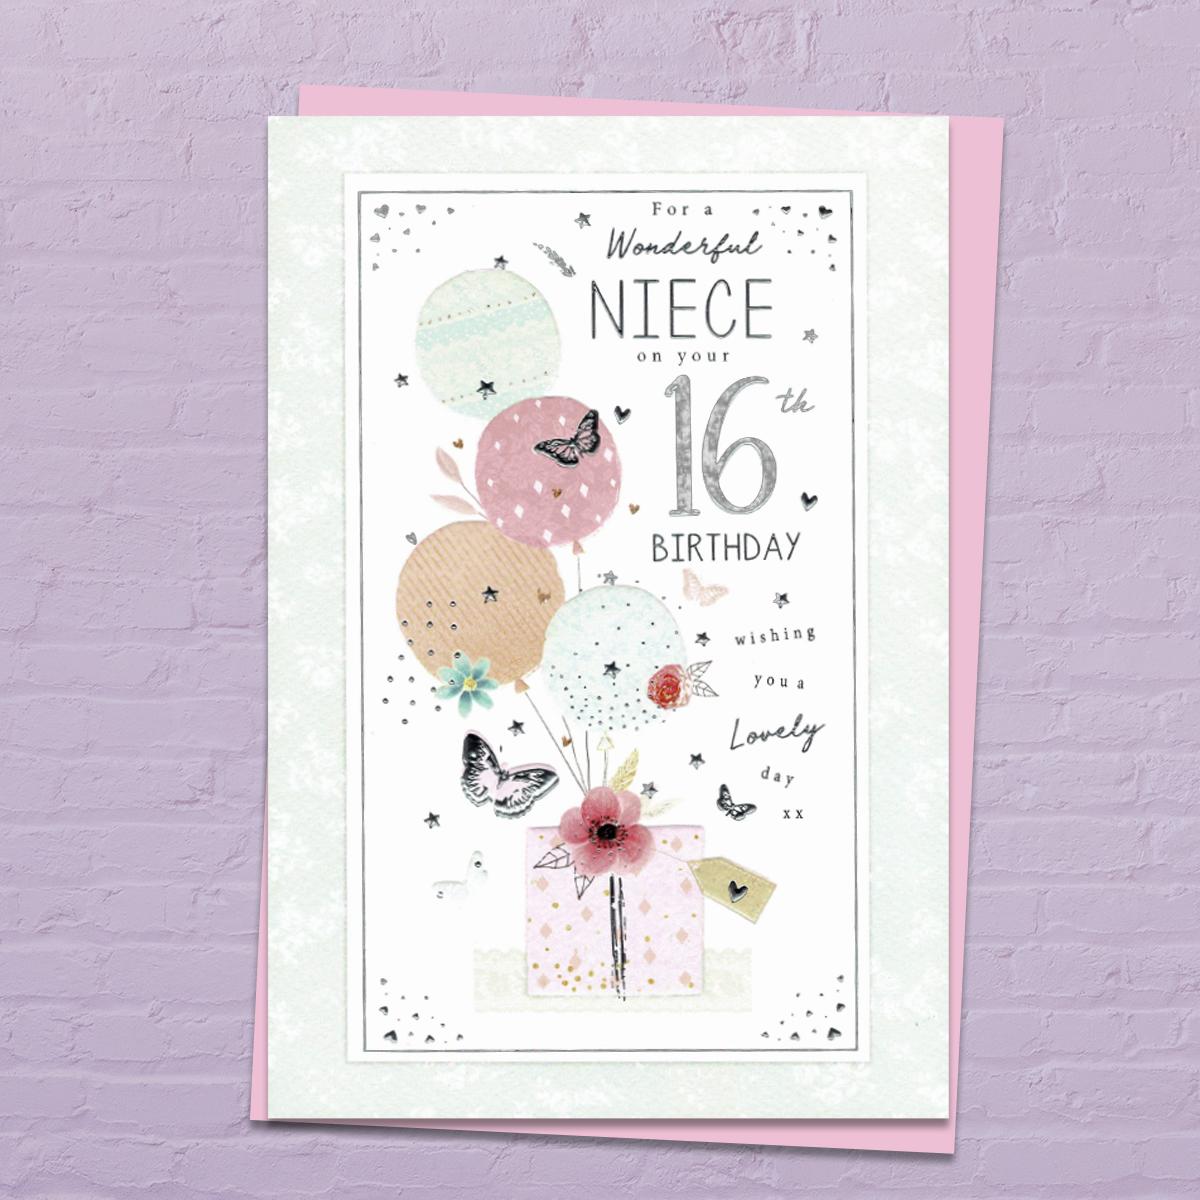 Niece Age 16 Birthday Card Front Image